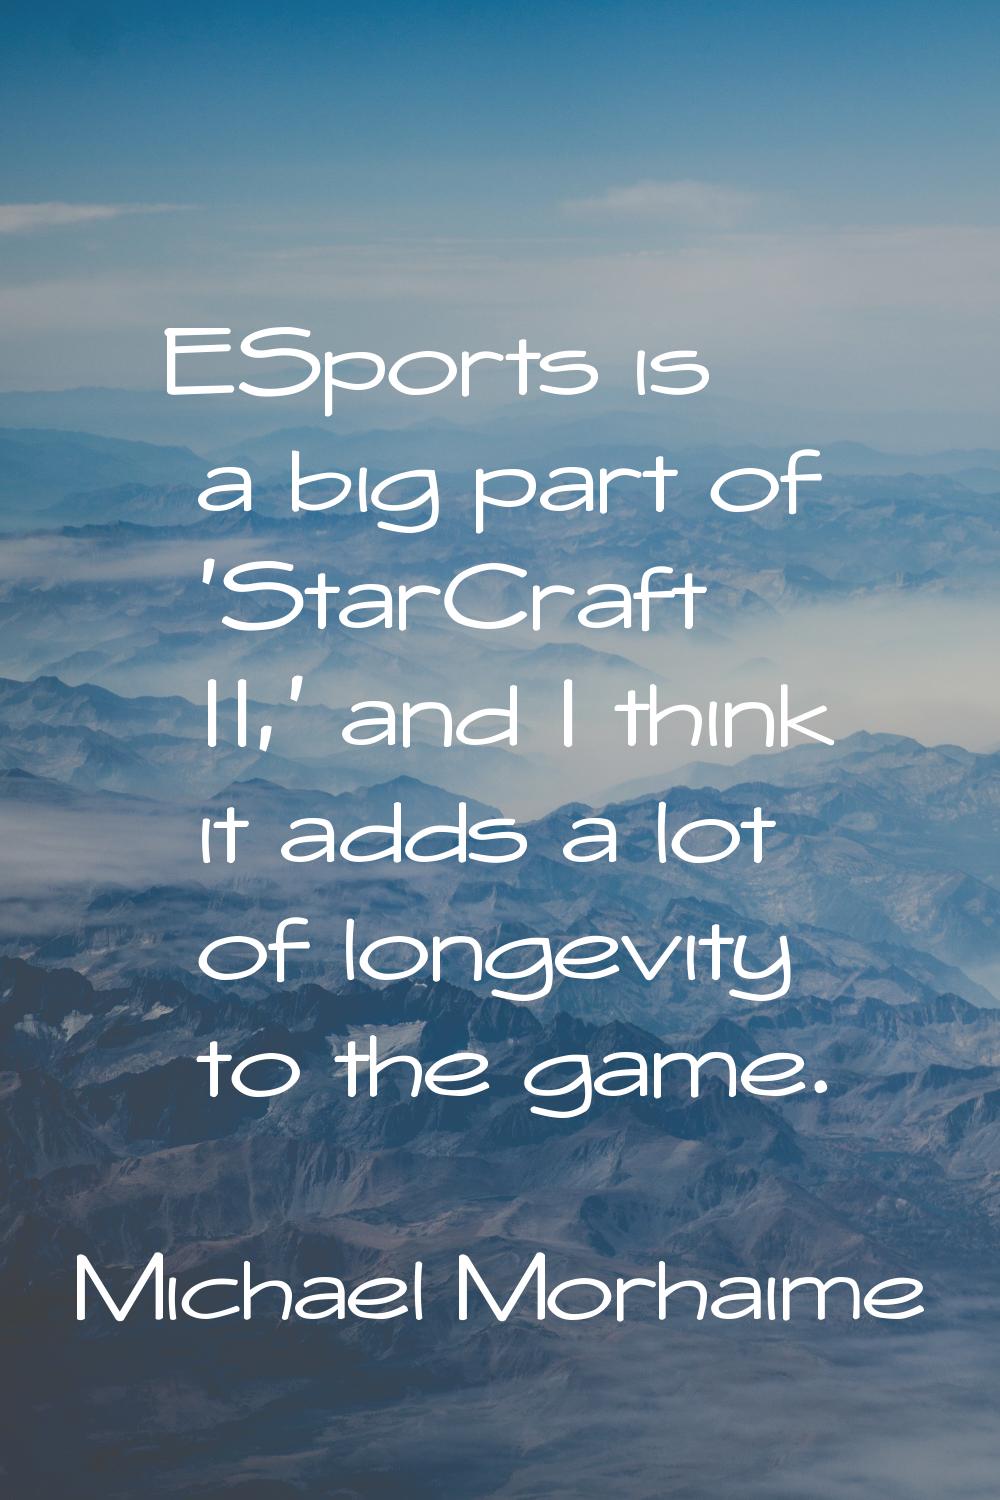 ESports is a big part of 'StarCraft II,' and I think it adds a lot of longevity to the game.